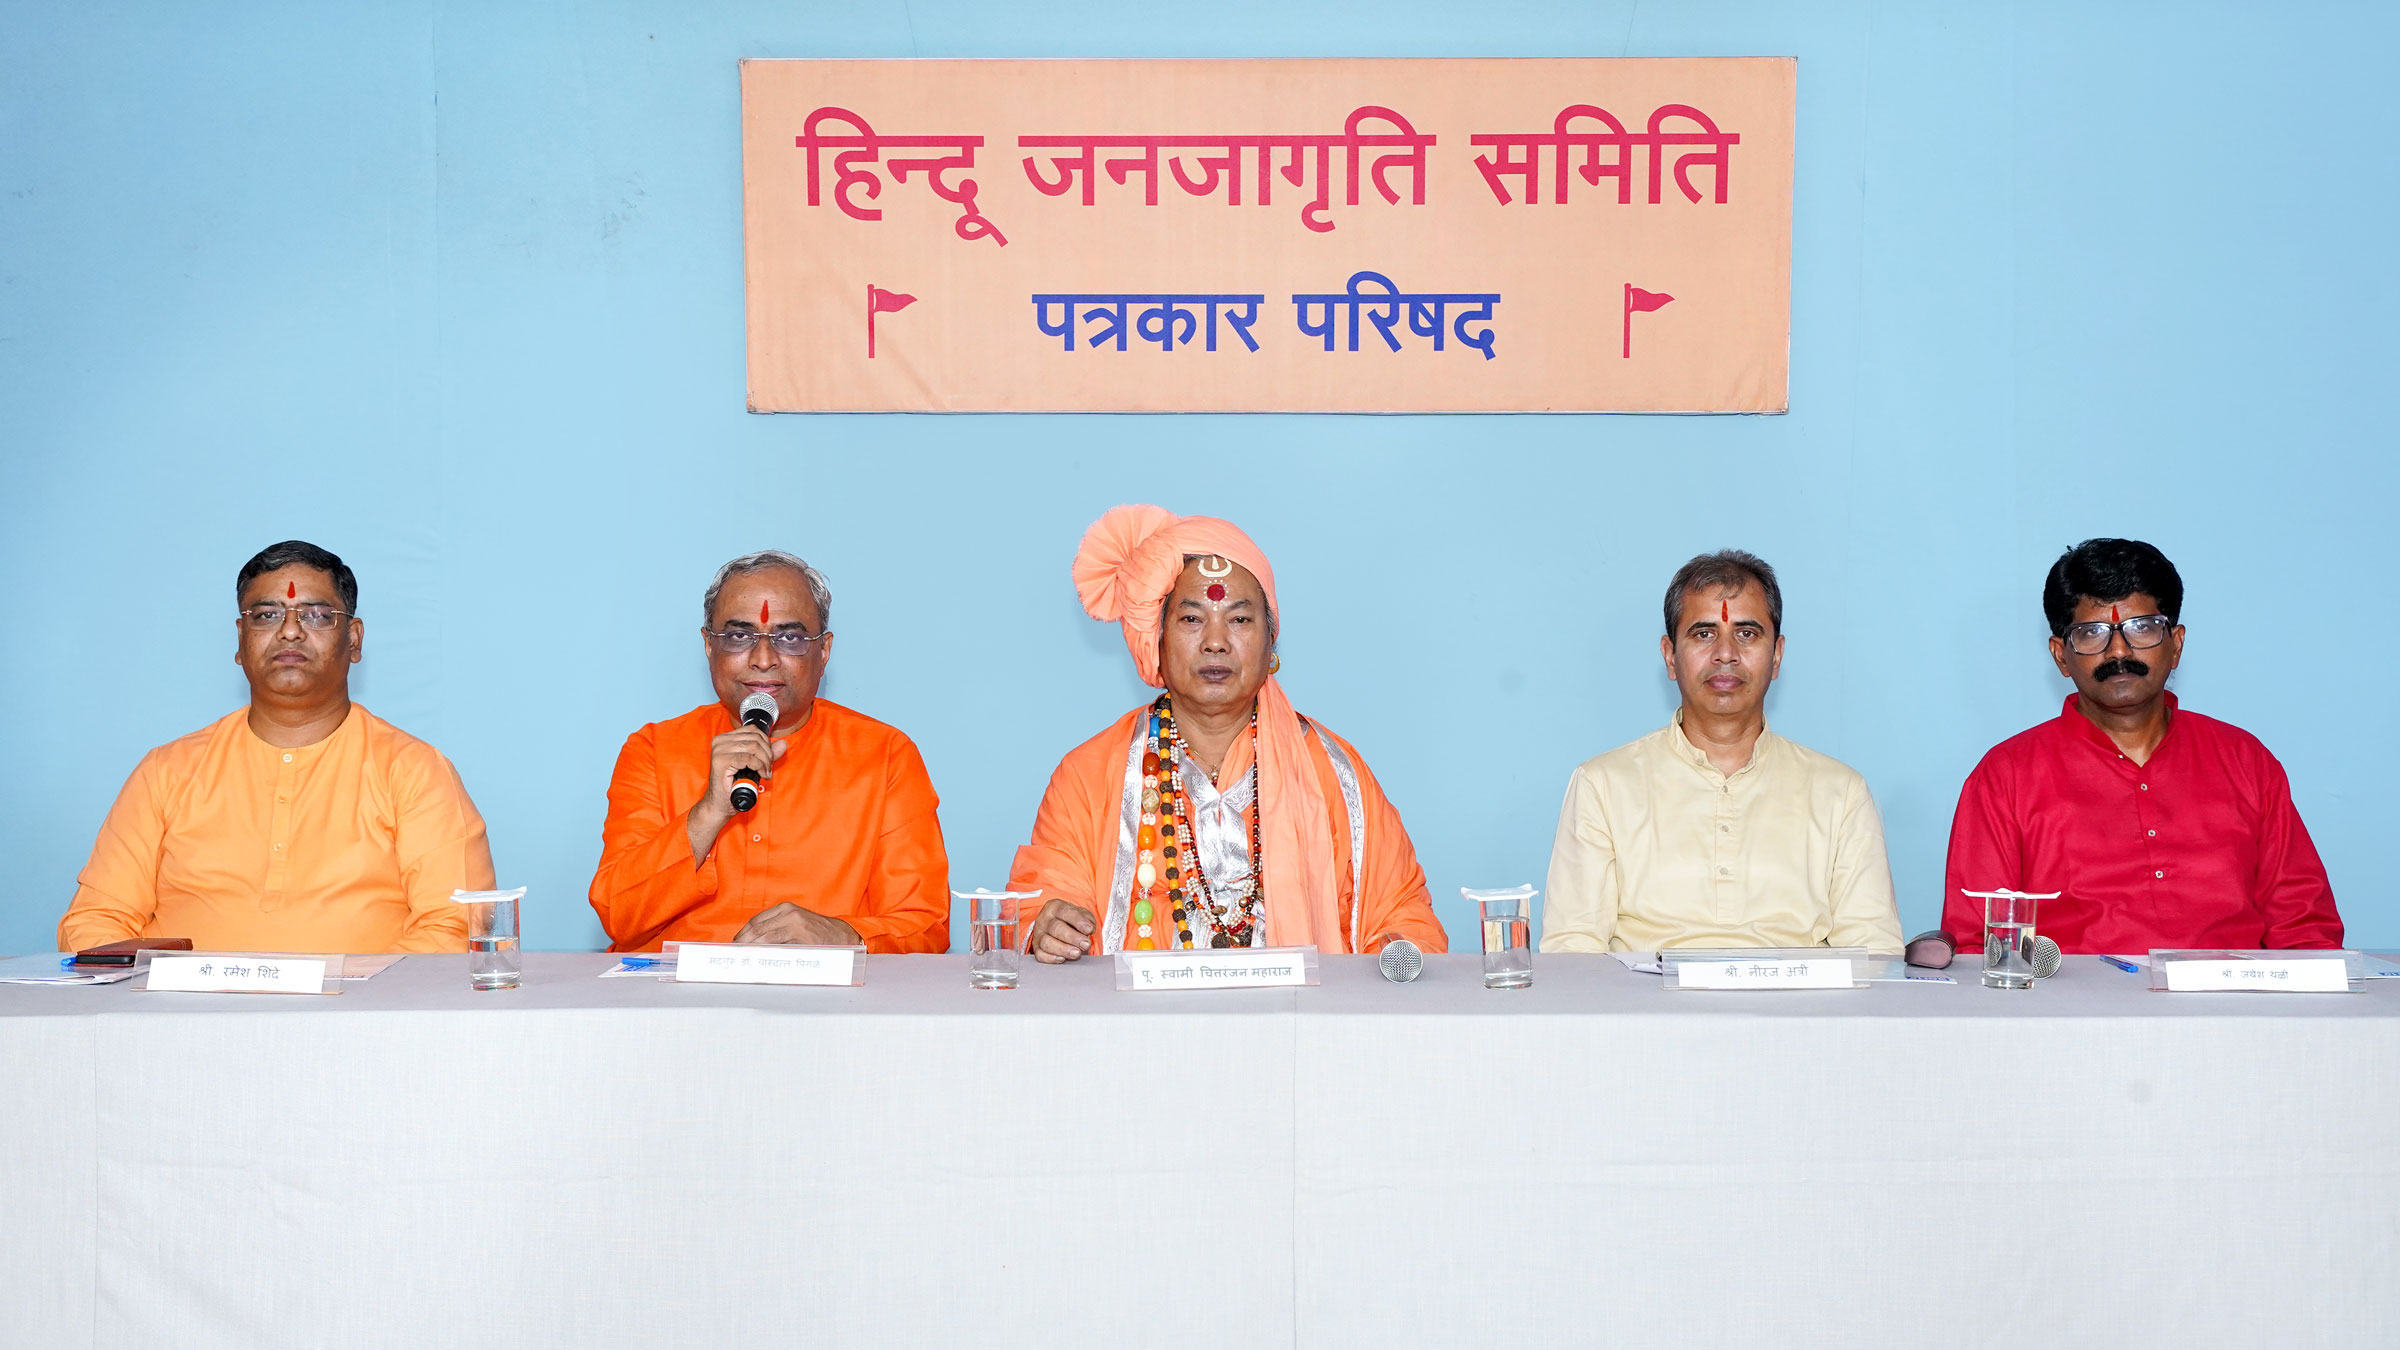 Sadguru (Dr) Charudatta Pingale (National Guide, Hindu Janajagruti Samiti) said in the Press Conference – Next year, we will implement a dress code in over 1,000 temples and create public awareness against ‘Love Jihad’.